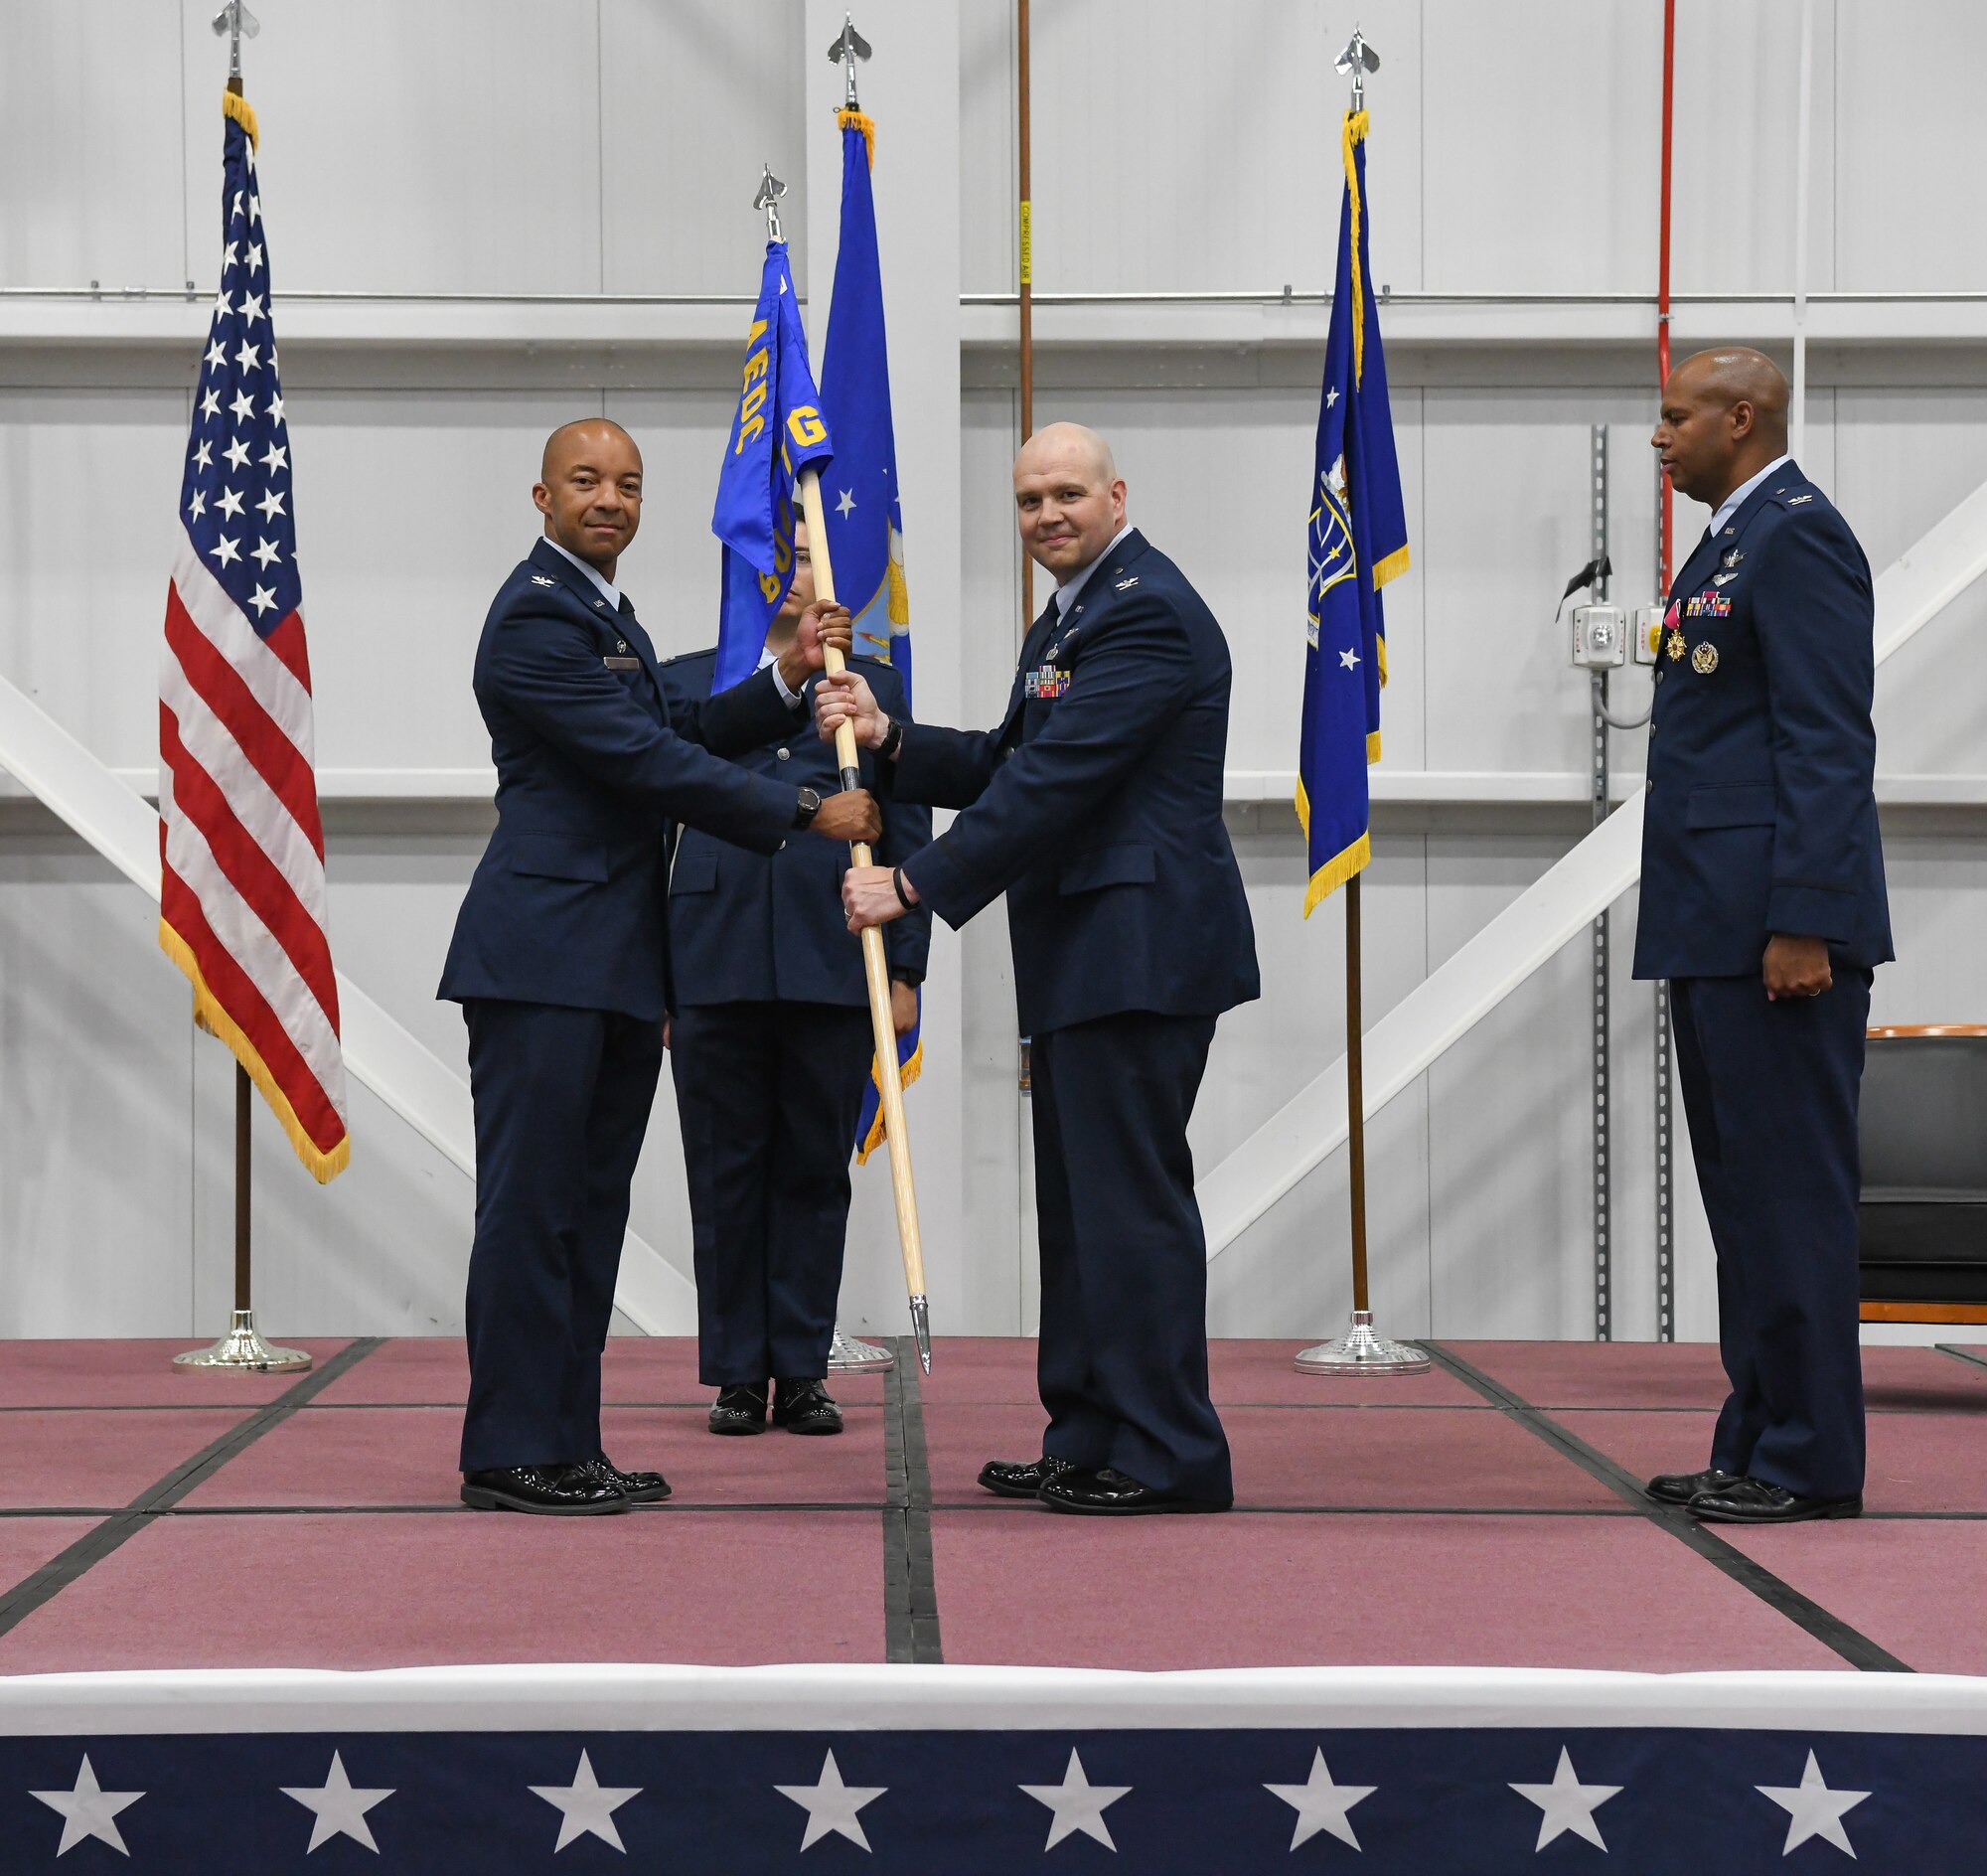 Arnold Engineering Development Complex Commander Col. Randel Gordon, left, passes the 804th Test Group guidon to Col. Jason Vap charging him with command of the group during a change of command ceremony June 21, 2022, in the Aircraft Test Support Facility at Arnold Air Force Base, Tennessee. Also pictured are Col. Linc Bonner, right, previous 804 TG commander, and Capt. Christopher Fernandez, guidon bearer. (U.S. Air Force photo by Jill Pickett)